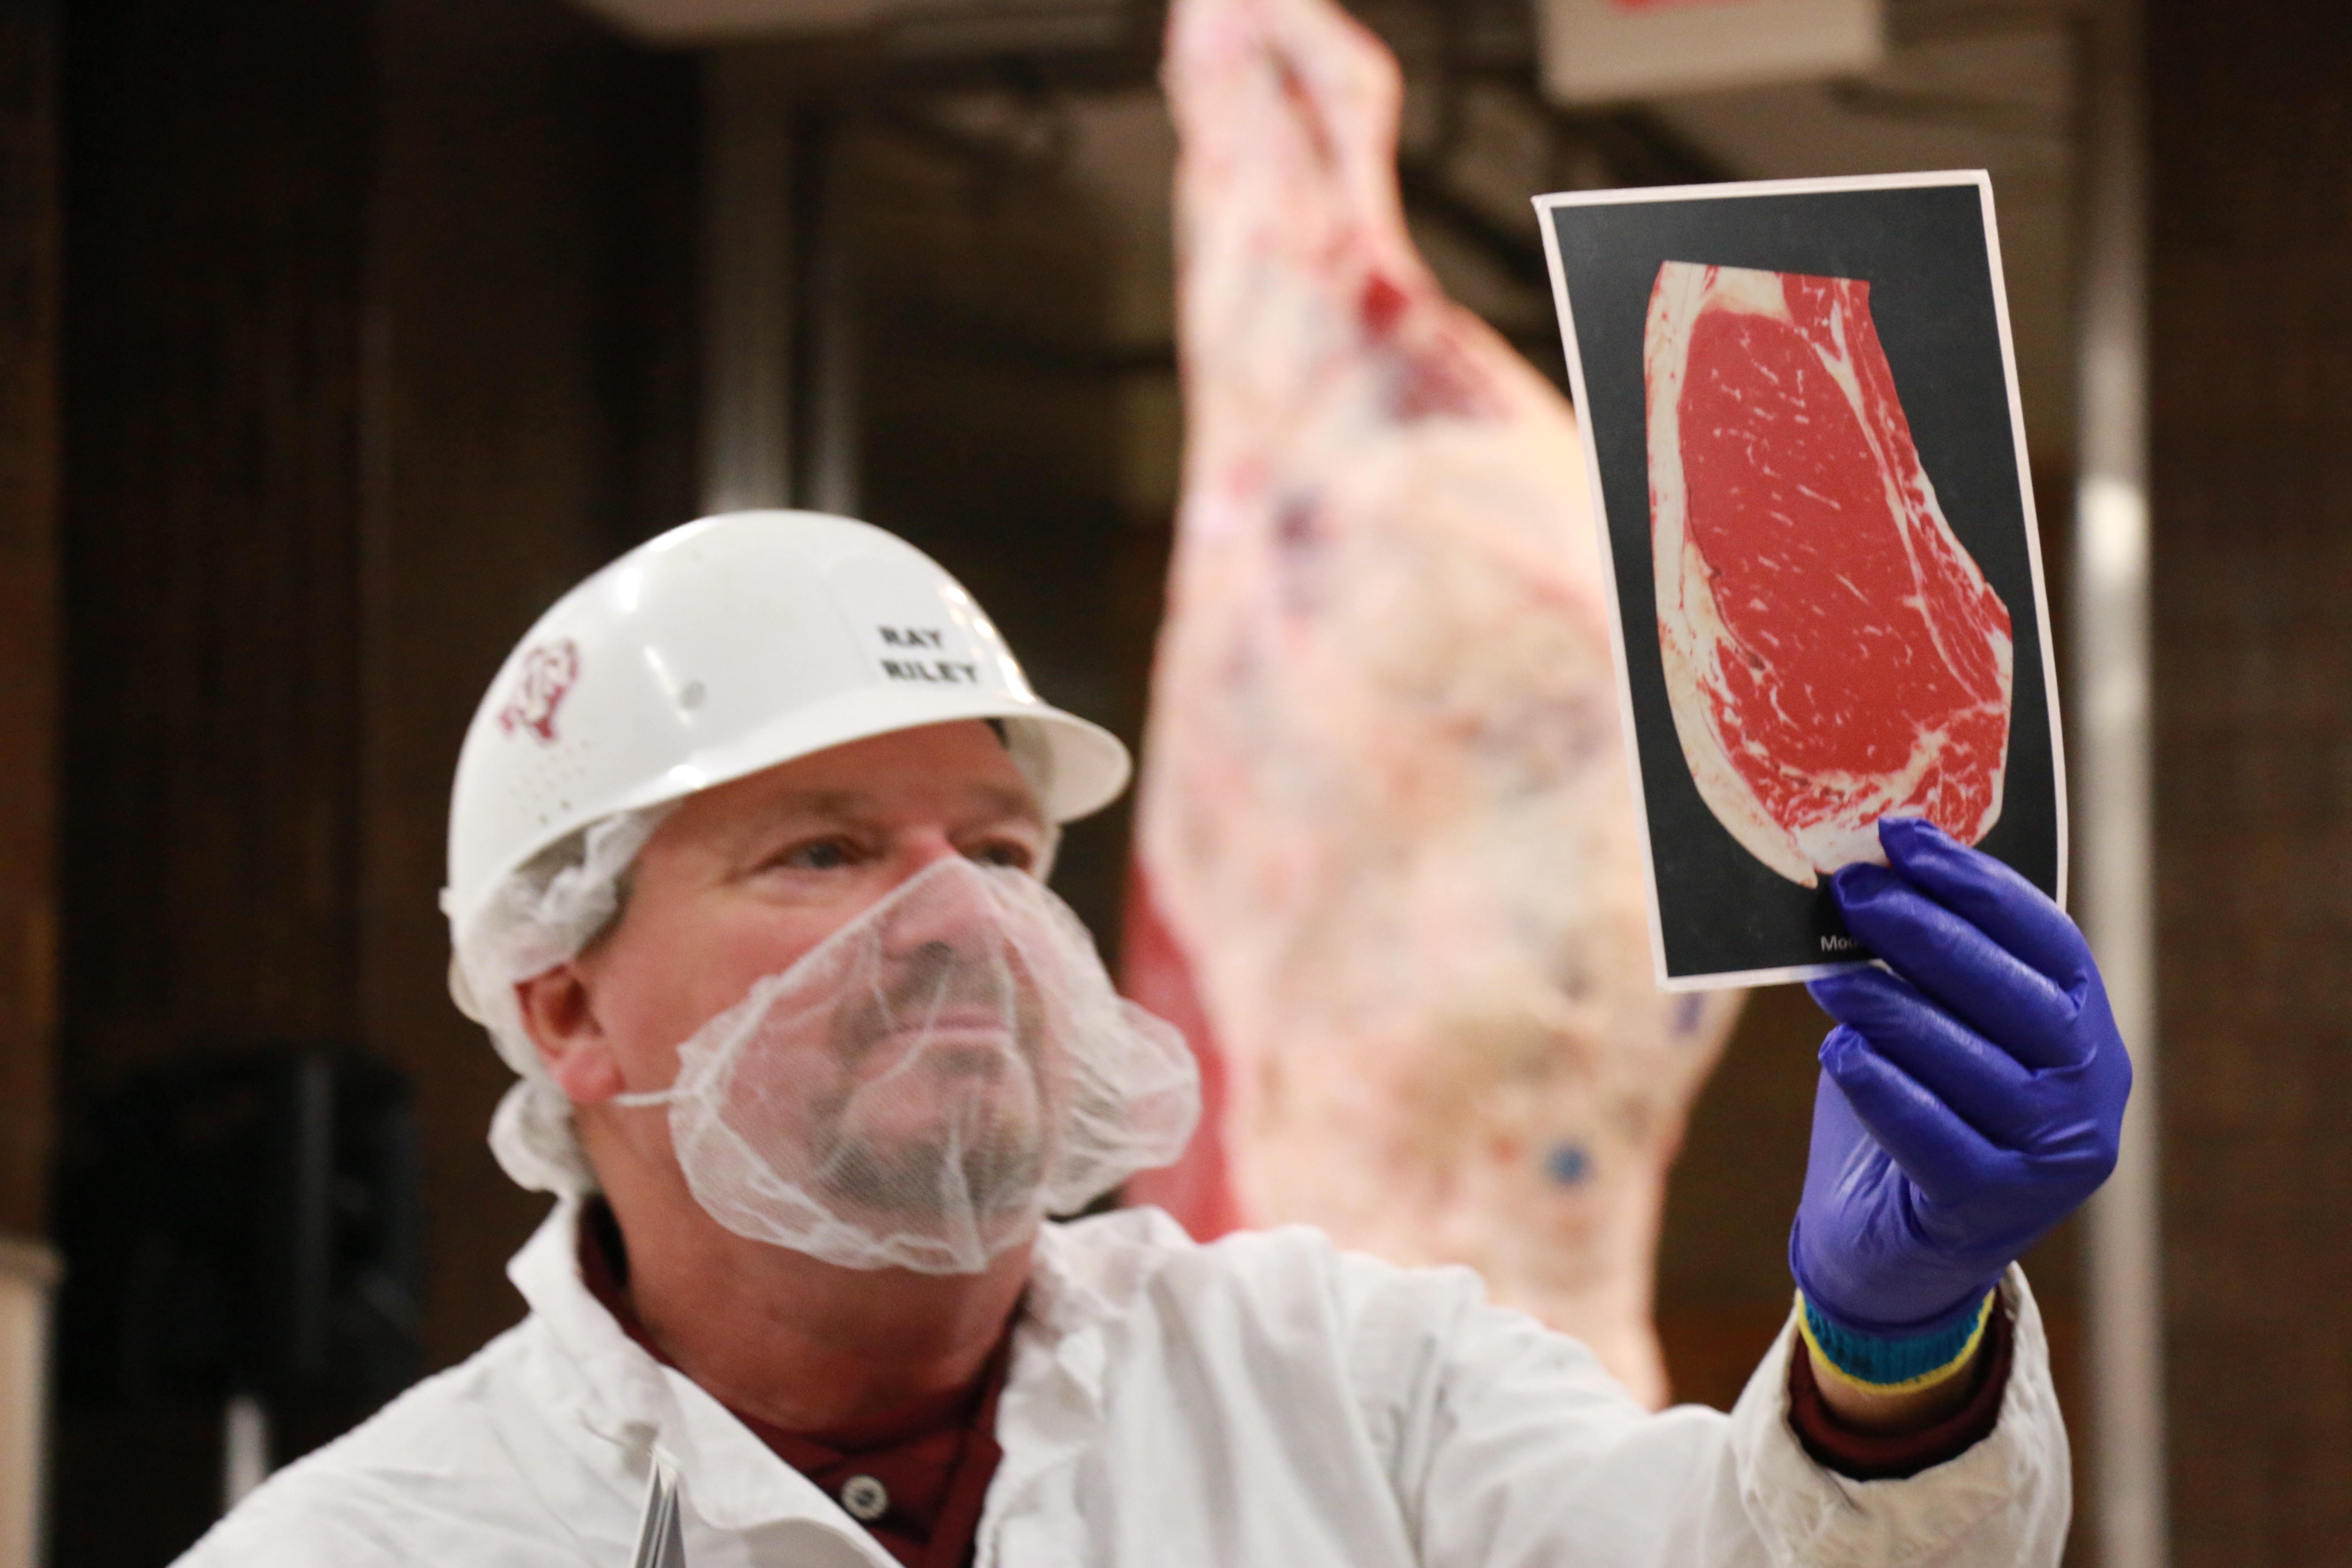 Ray Riley showing marbling card used in USDA beef quality grading